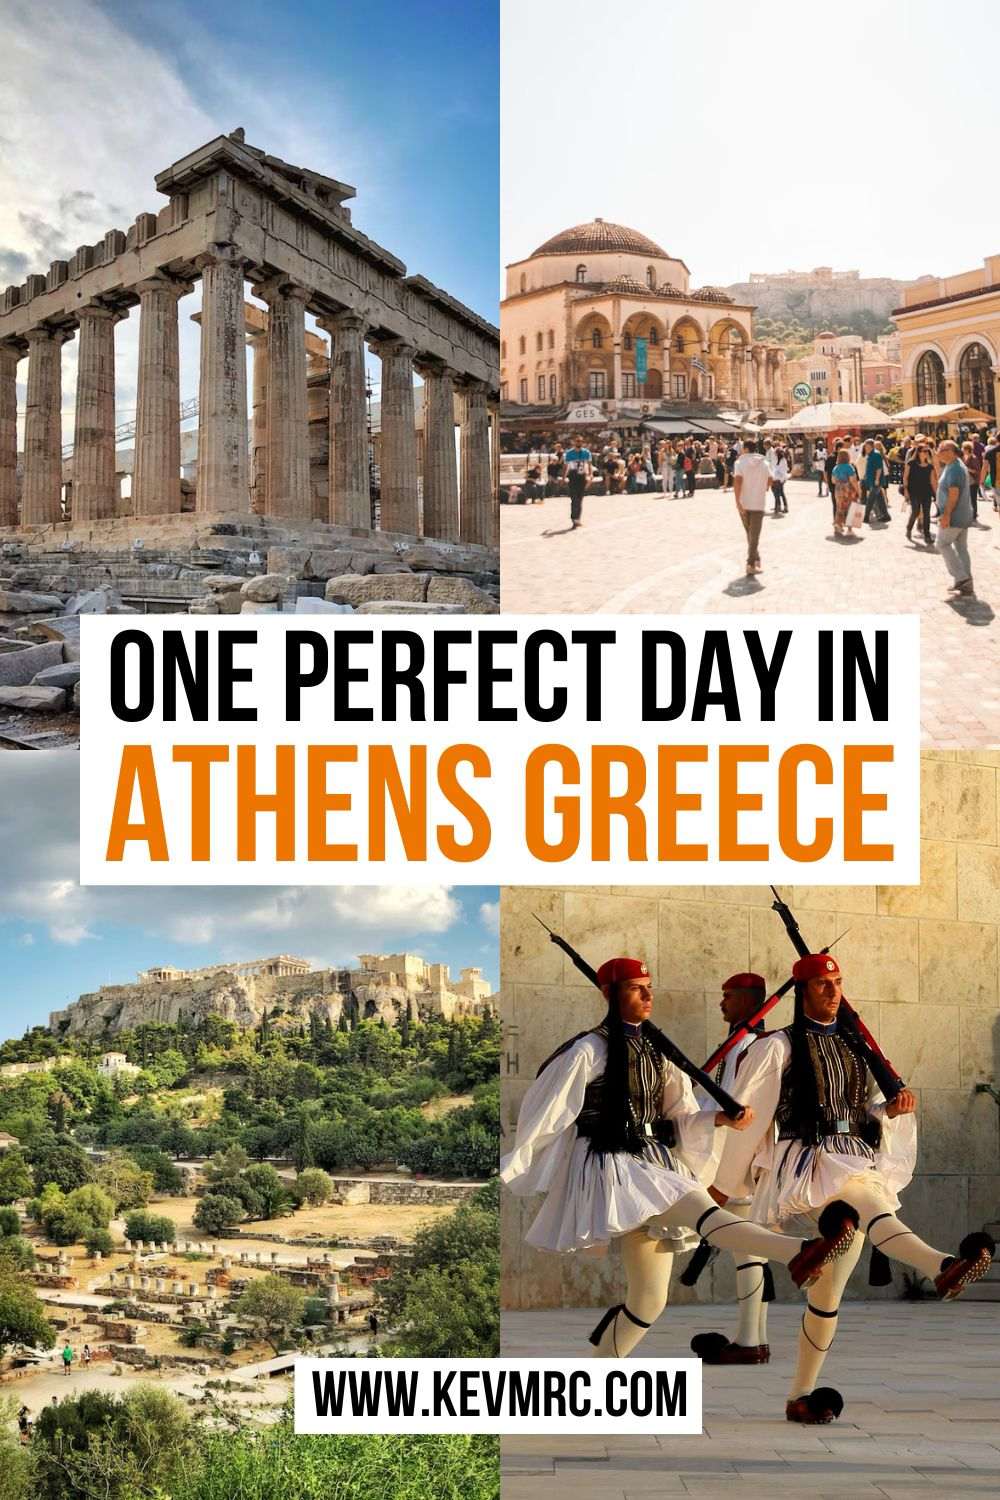 Wondering how to spend 1 day in Athens? Discover here the best one day in Athens itinerary in this guide, with travel tips and a free map. athens 1 day itinerary | athens greece itinerary | best things to do in athens greece | top things to do in athens greece | fun things to do in athens greece | athens travel guide #athens